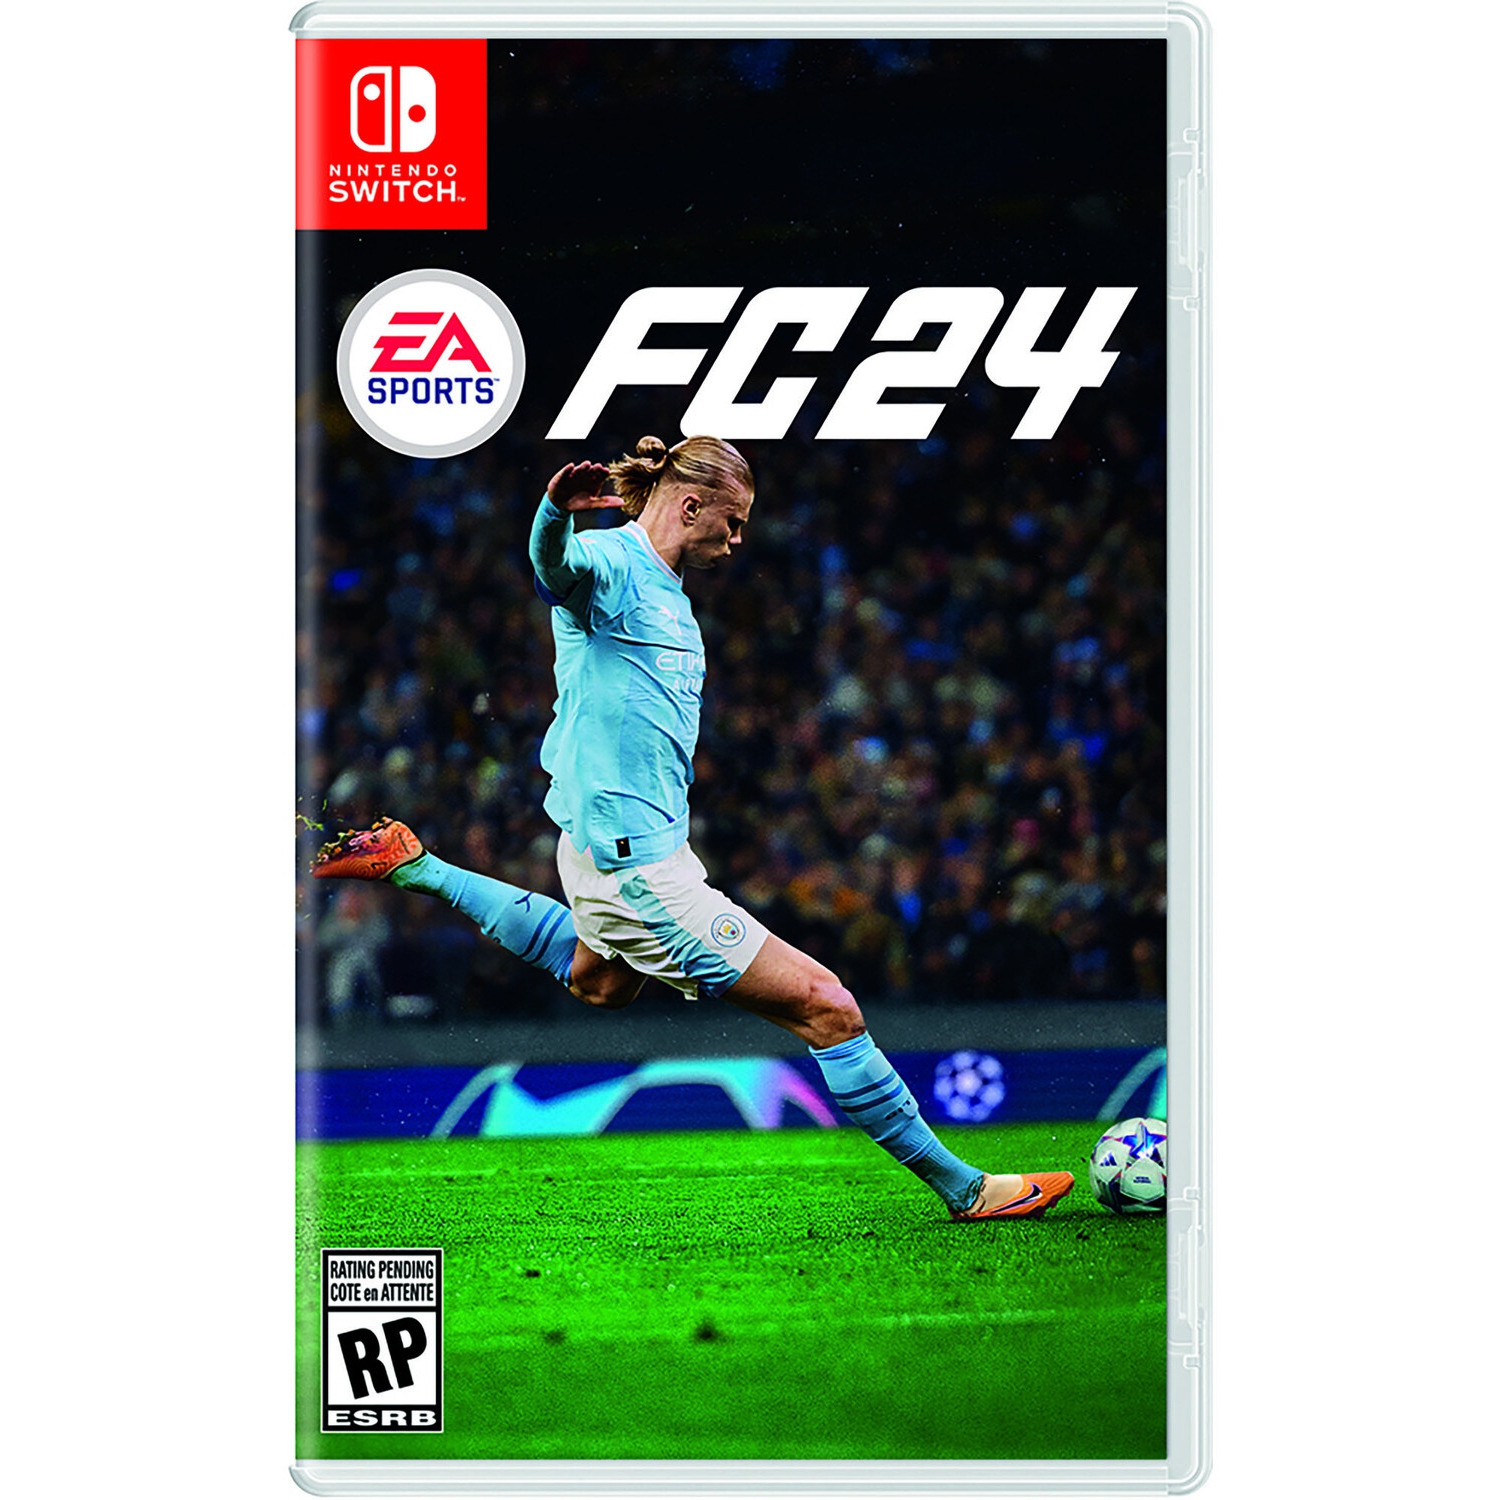 EA Sports FC 24 for Nintendo Switch [VIDEOGAMES]